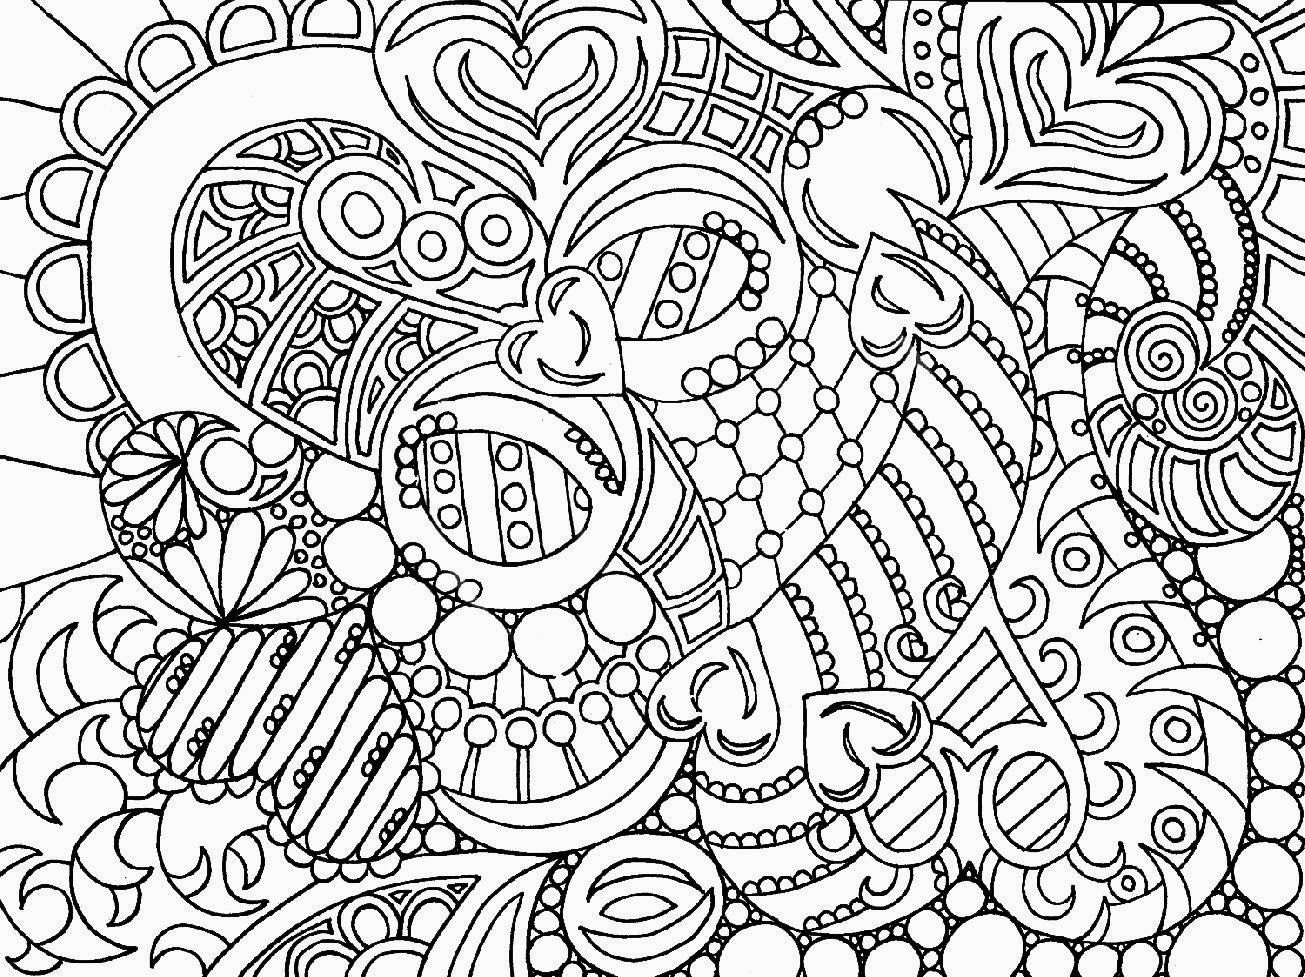 Large Adult Coloring Books
 Coloring pages of names adults